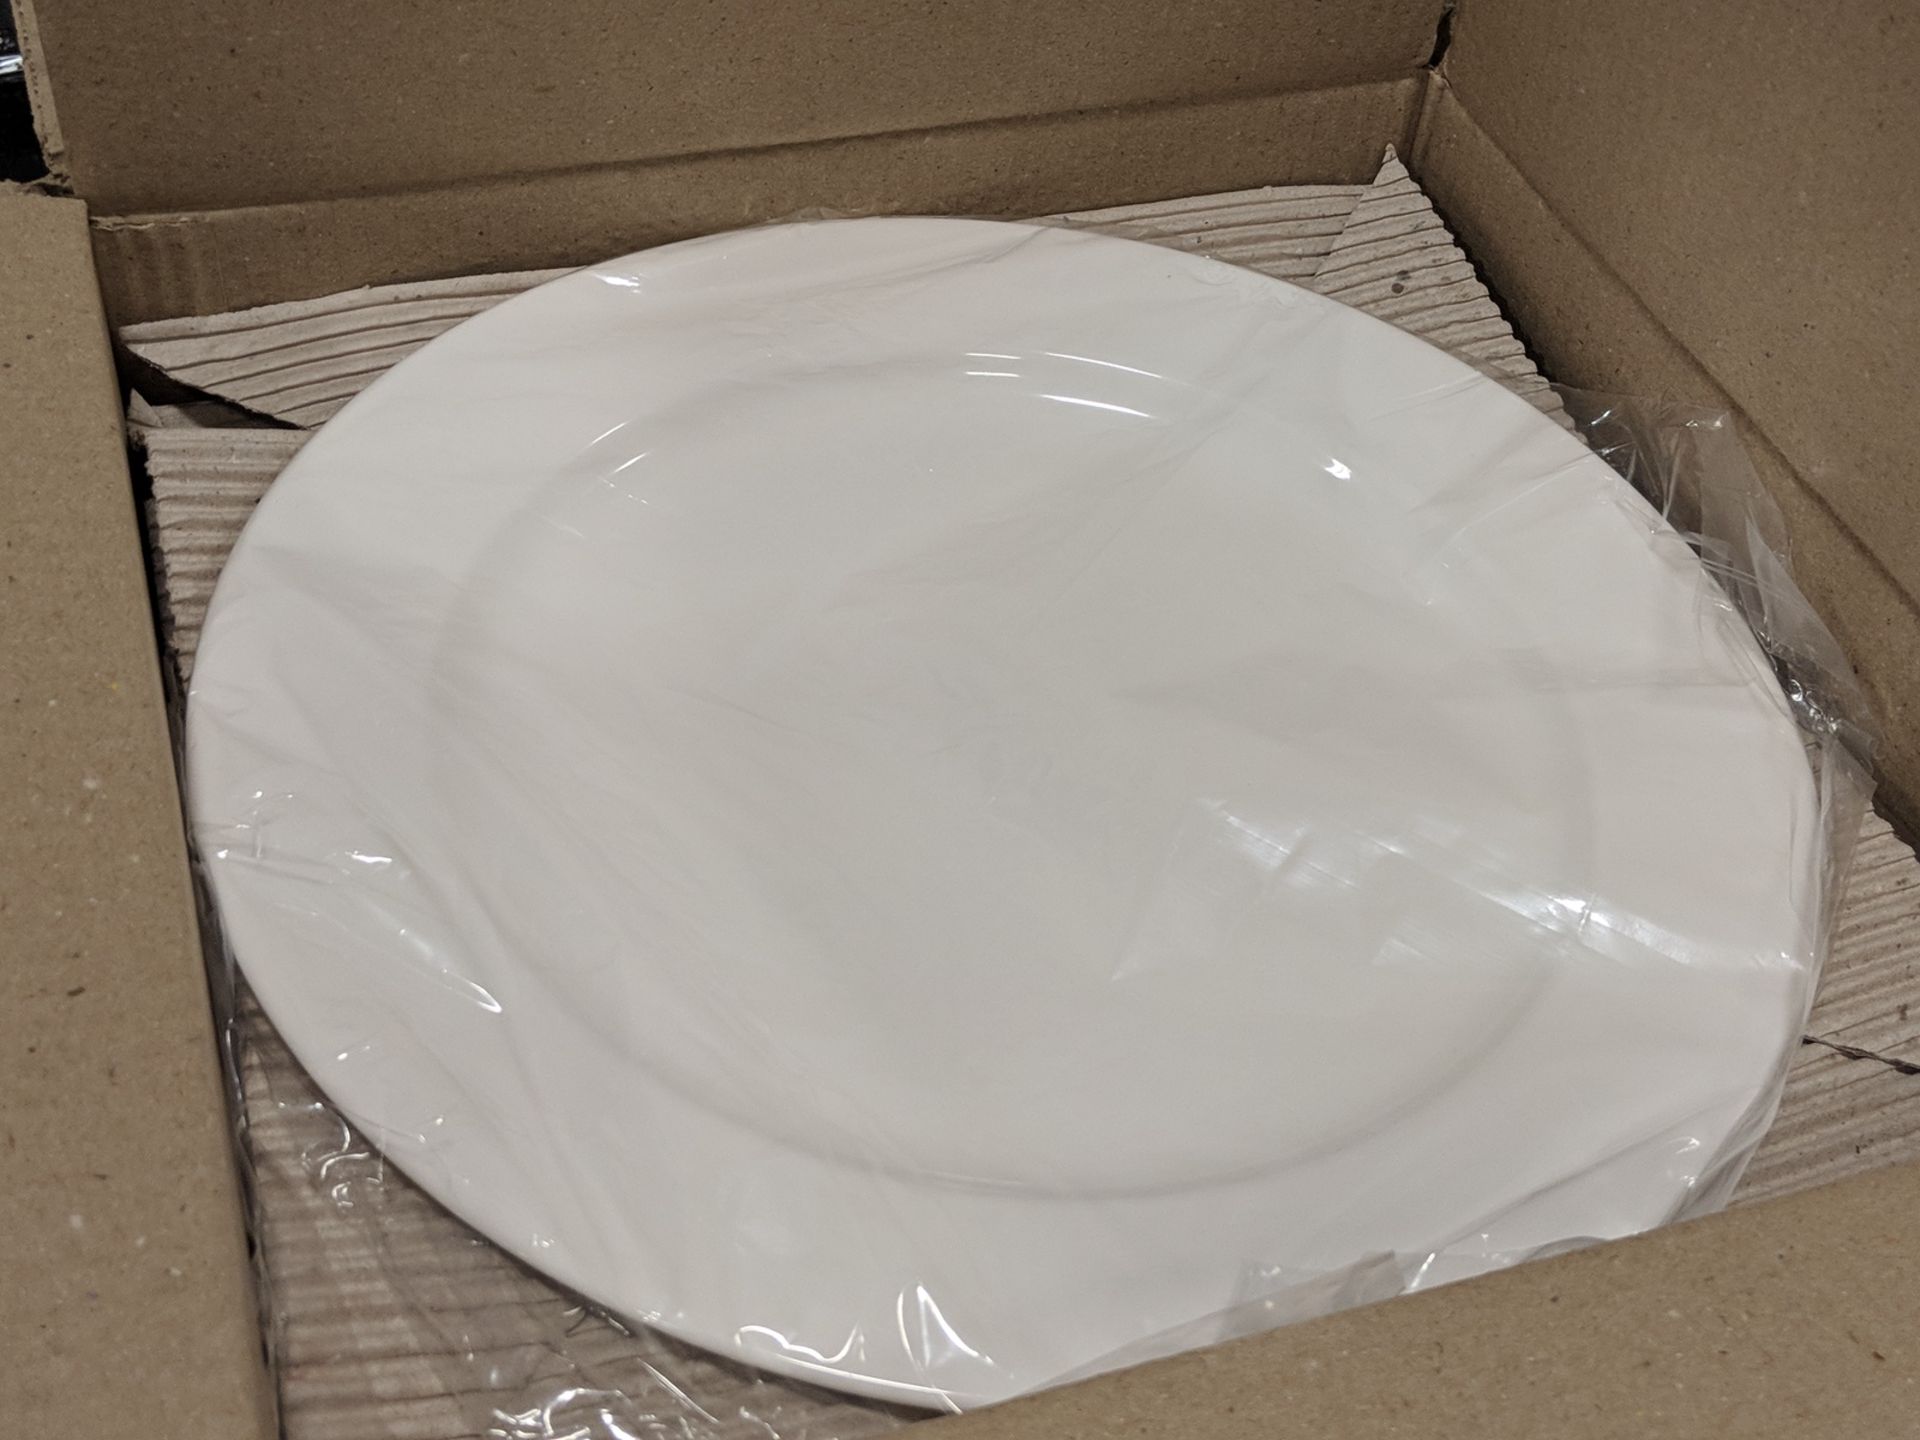 11-7/8" Infinity Service Plates - Lot of 12 (1 Case), Arcoroc R1001 - Image 3 of 6